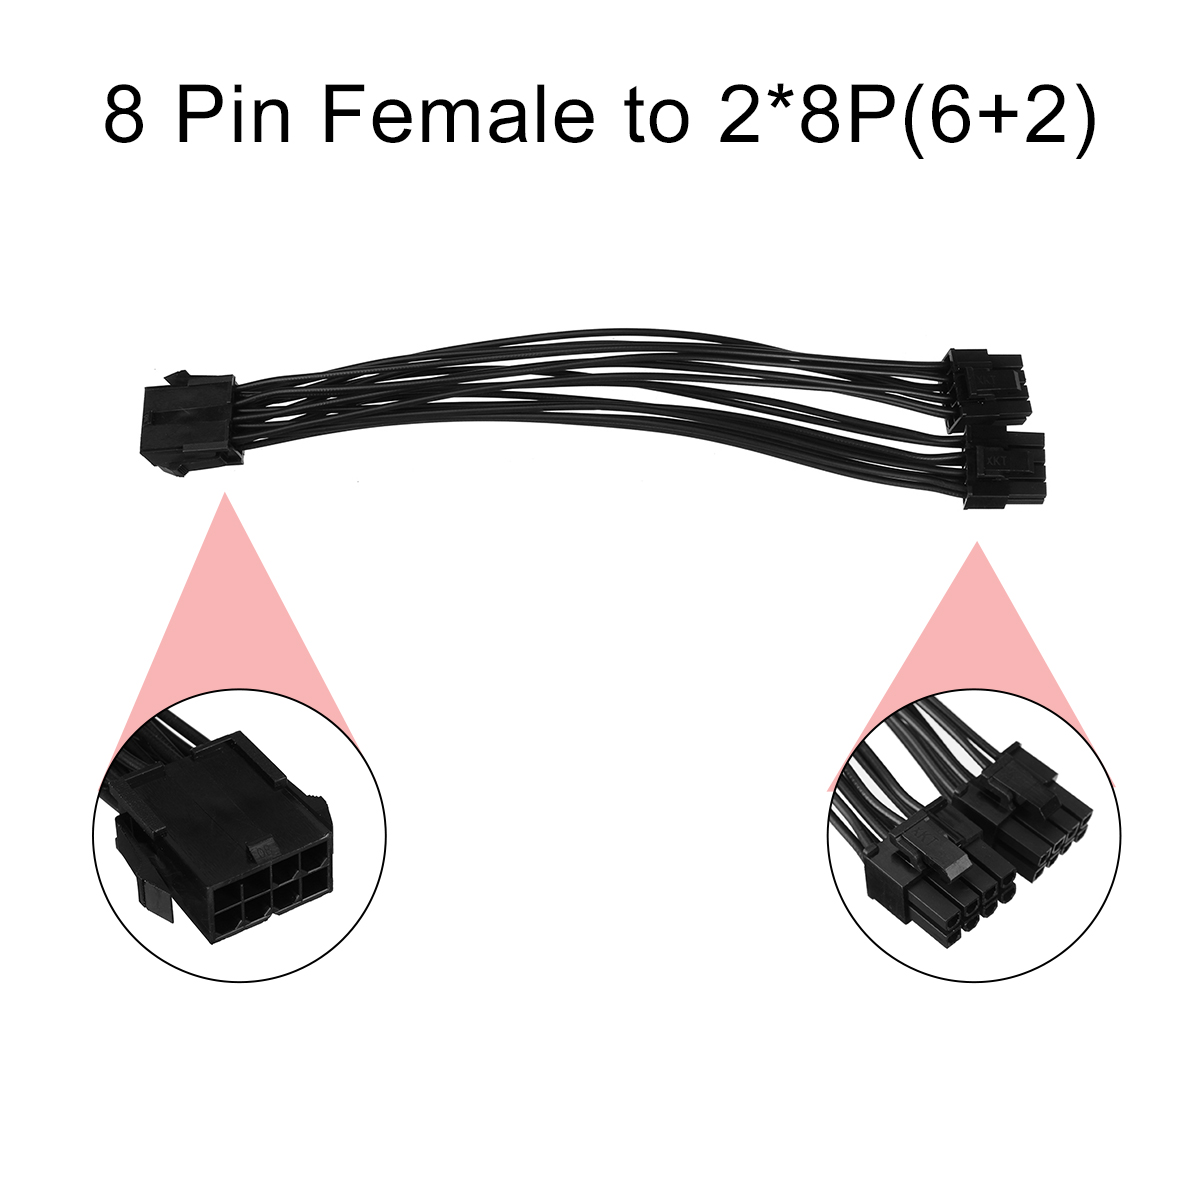 20cm-Graphics-Card-8-Pin-Female-to-28P62pin-Extention-Power-Cable-Male-1931117-3